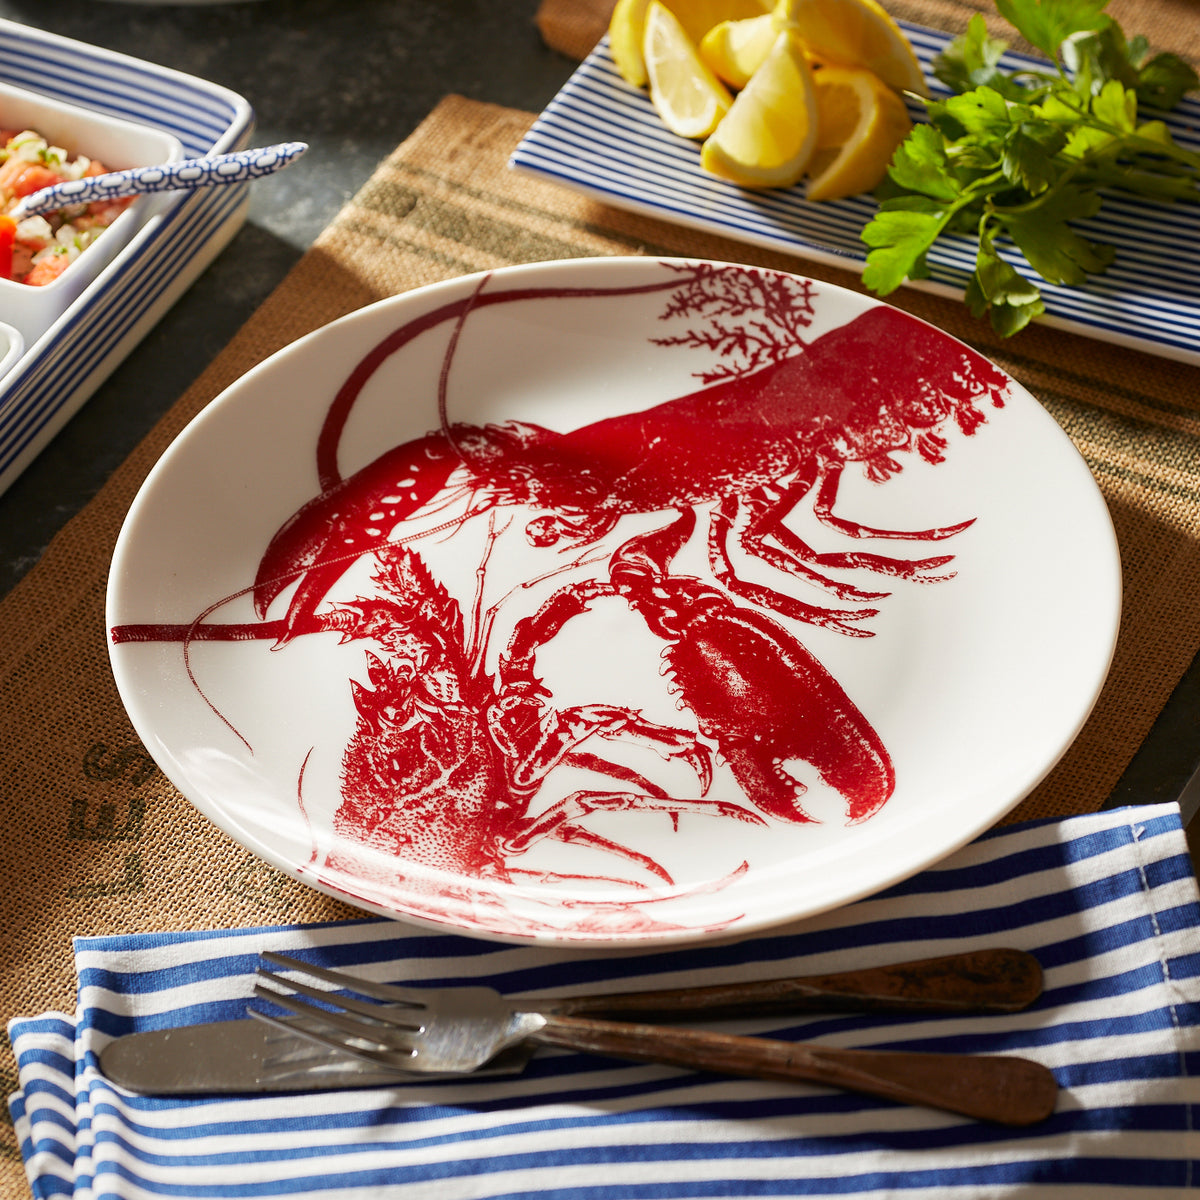 A Caskata Lobster Coupe Dinner Plate made of premium porcelain features a red lobster illustration on a white backdrop, placed on a table with a striped blue and white napkin, fork, and knife. The plate is dishwasher and microwave safe. Lemon wedges and greens add to the coastal charm in the background.